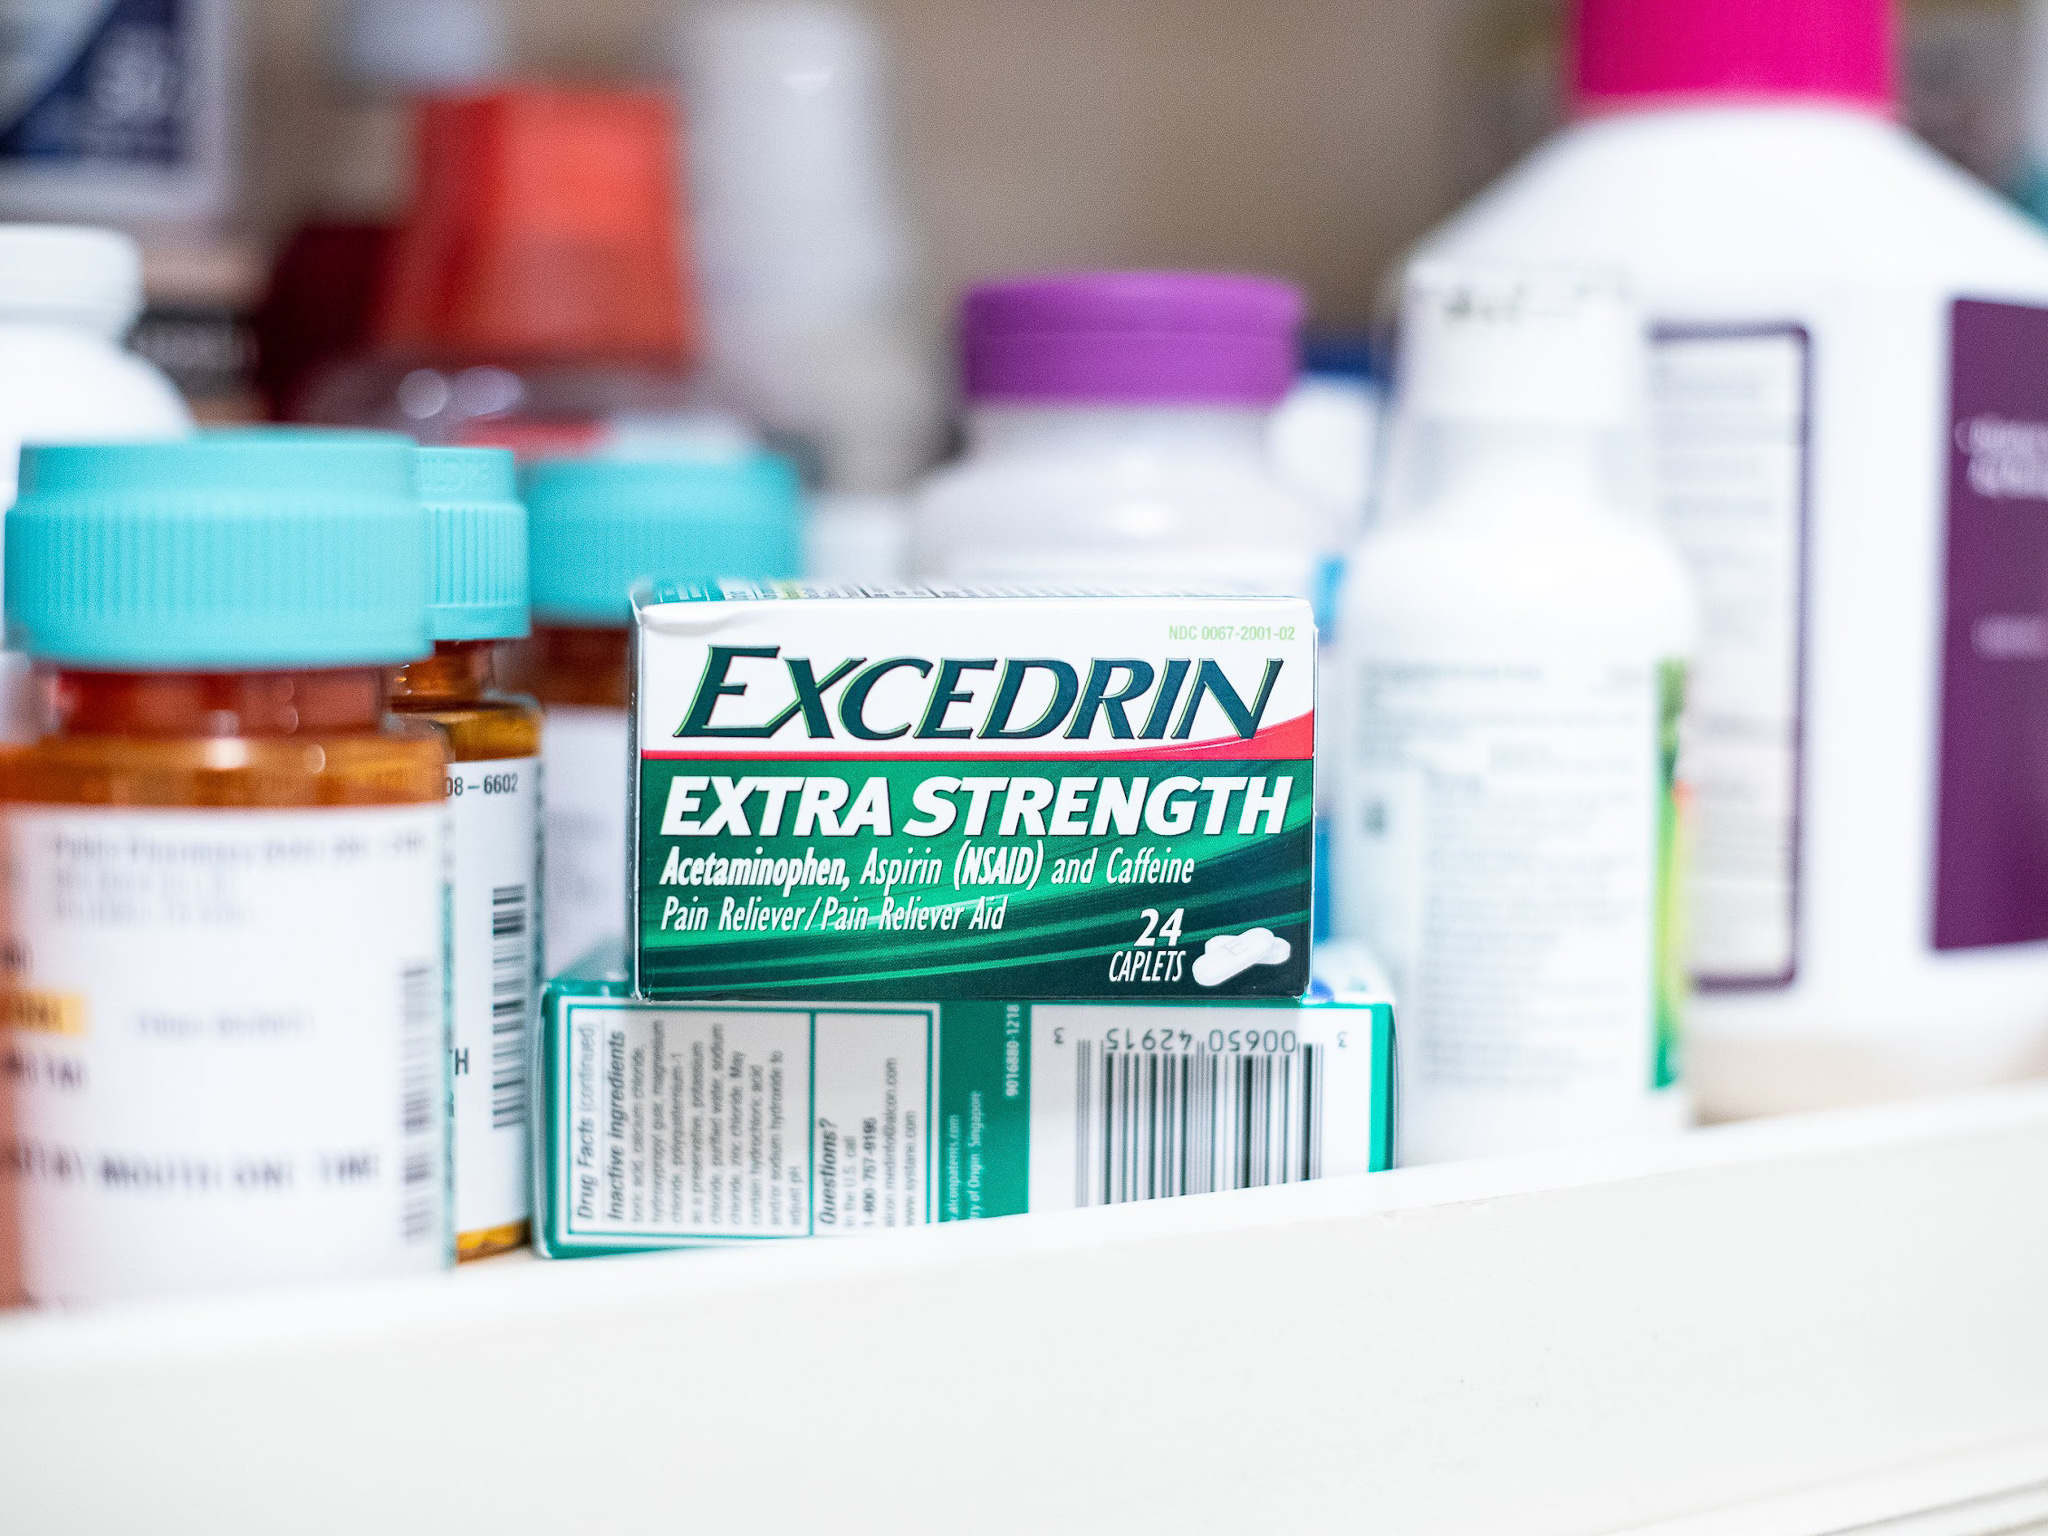 Score Excedrin 100-Count For As Low As $4.74 Per Bottle At Publix (Regular Price $12.99)